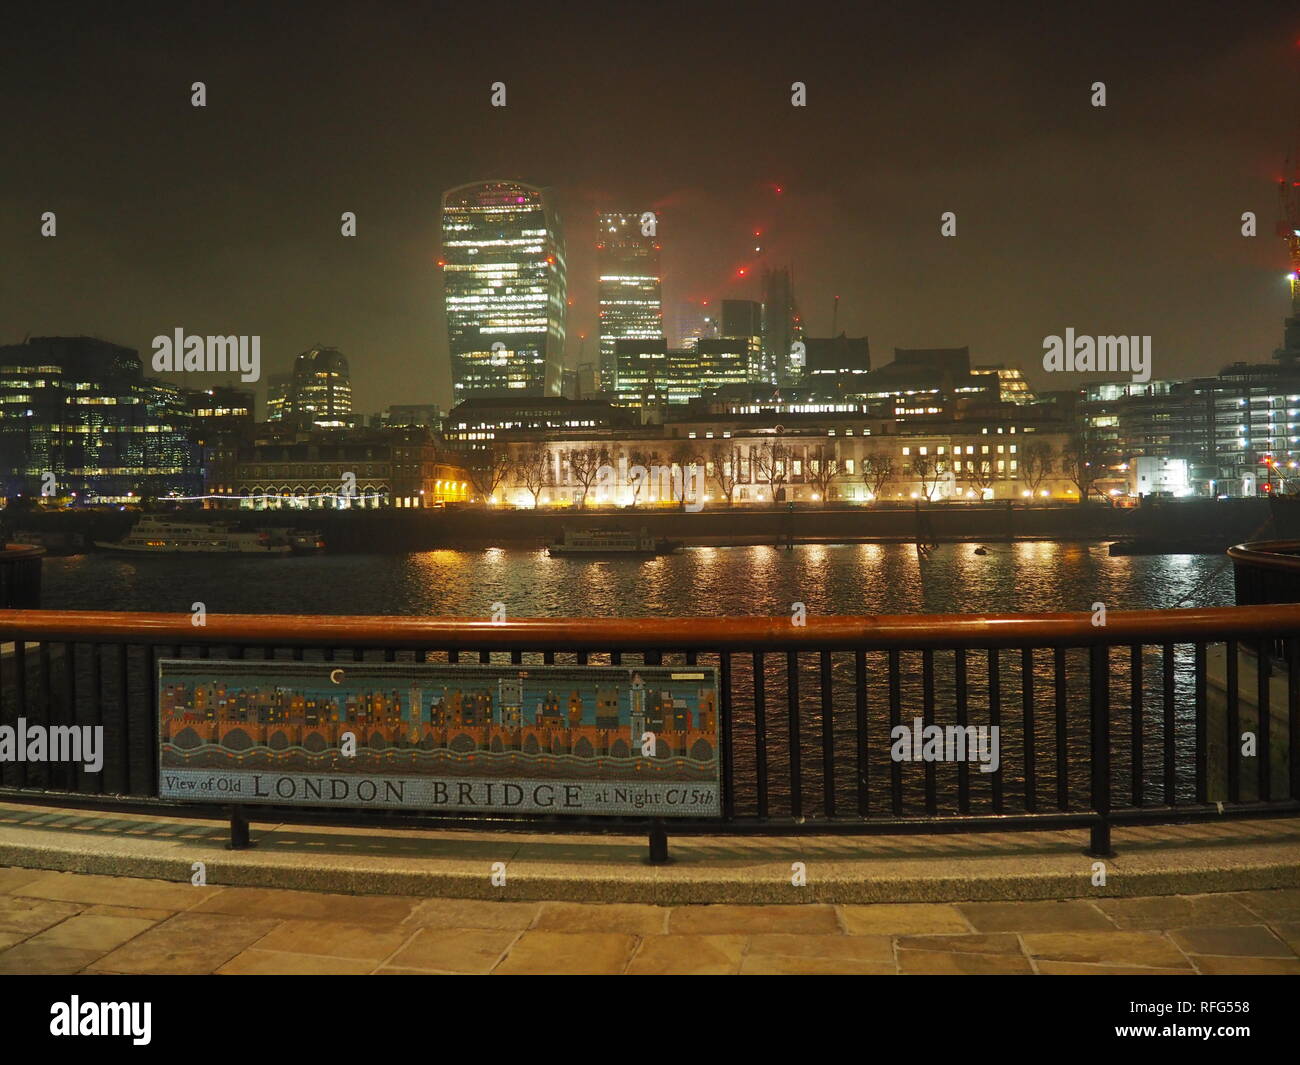 'View of London Bridge by Night' sign from the Hay's Galleria - London - UK Stock Photo